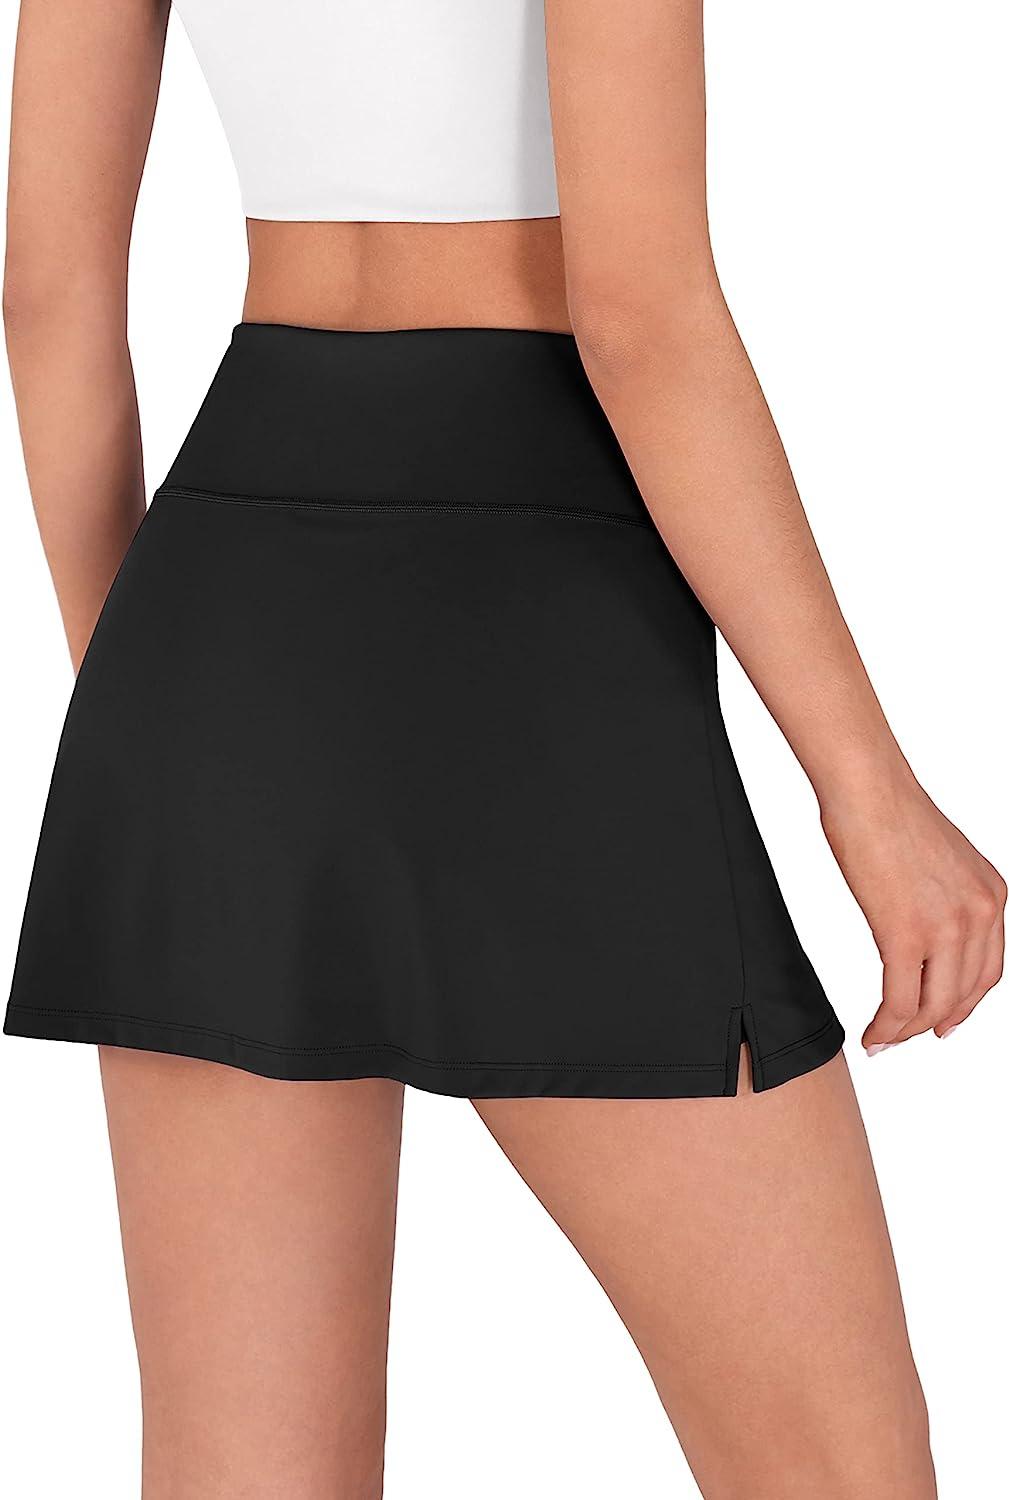 ODODOS Women's Athletic Tennis Skorts with Pockets Built-in Shorts Golf  Active Skirts for Sports Running Gym Training Black Small